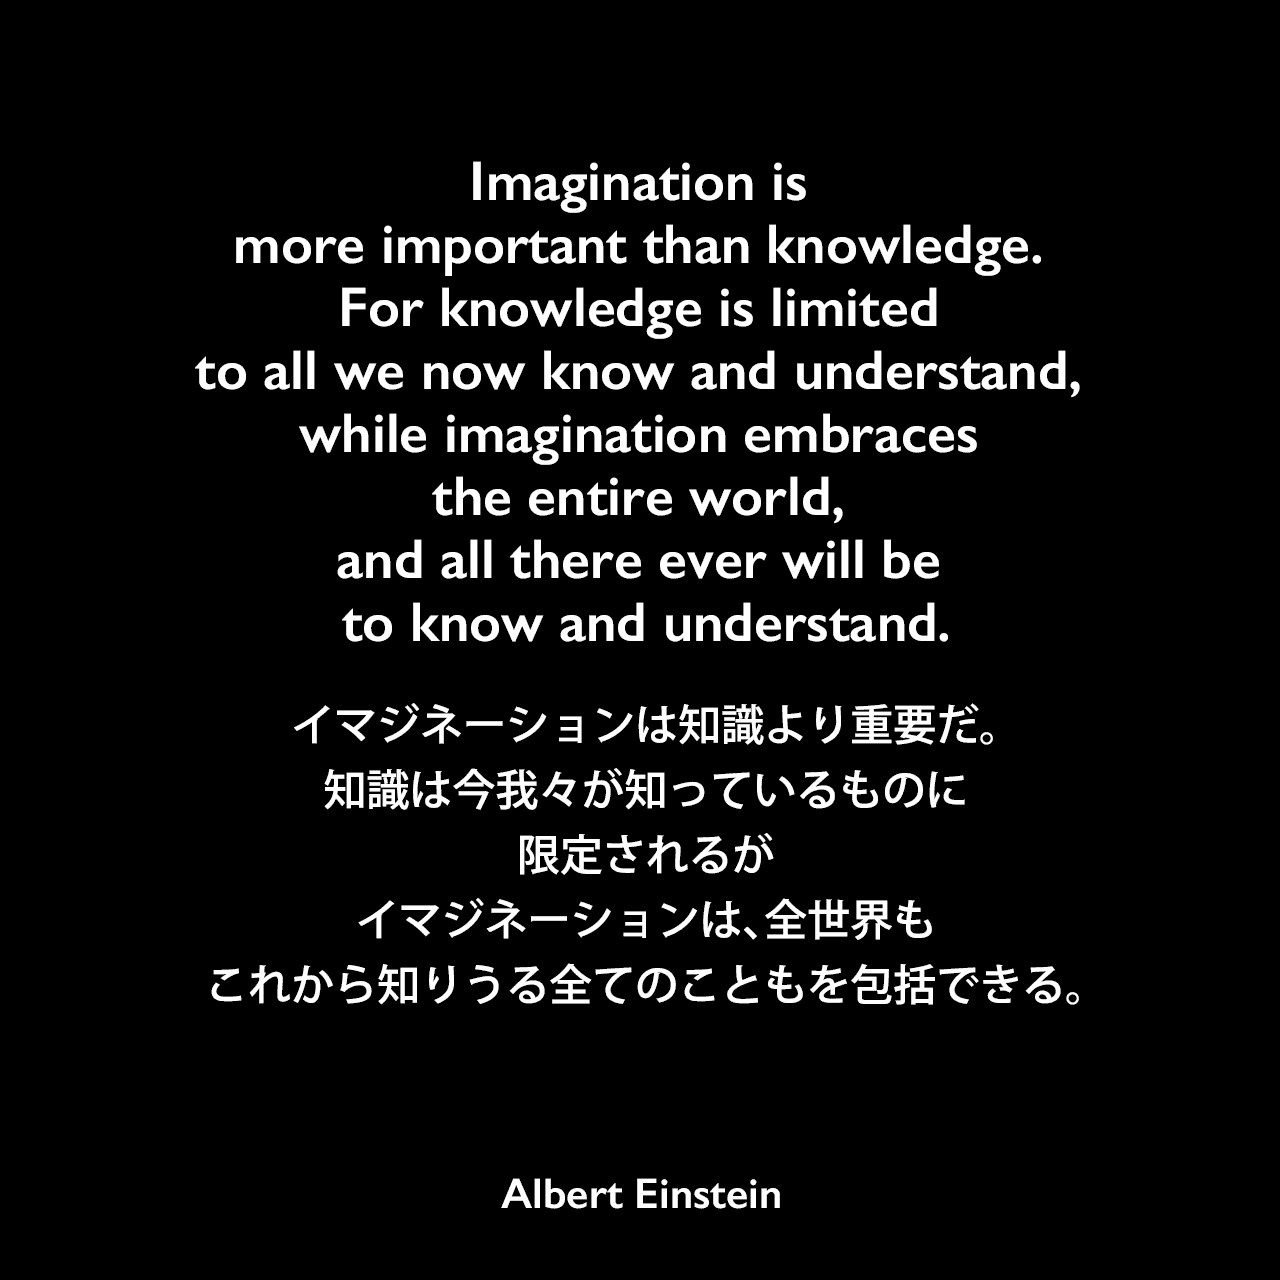 Imagination is more important than knowledge. For knowledge is limited to all we now know and understand, while imagination embraces the entire world, and all there ever will be to know and understand.イマジネーションは知識より重要だ。知識は今我々が知っているものに限定されるが、イマジネーションは、全世界も、これから知りうる全てのこともを包括できる。- ジョージ・シルヴェスター・ヴィエレックとのインタビュー（1929年）よりAlbert Einstein